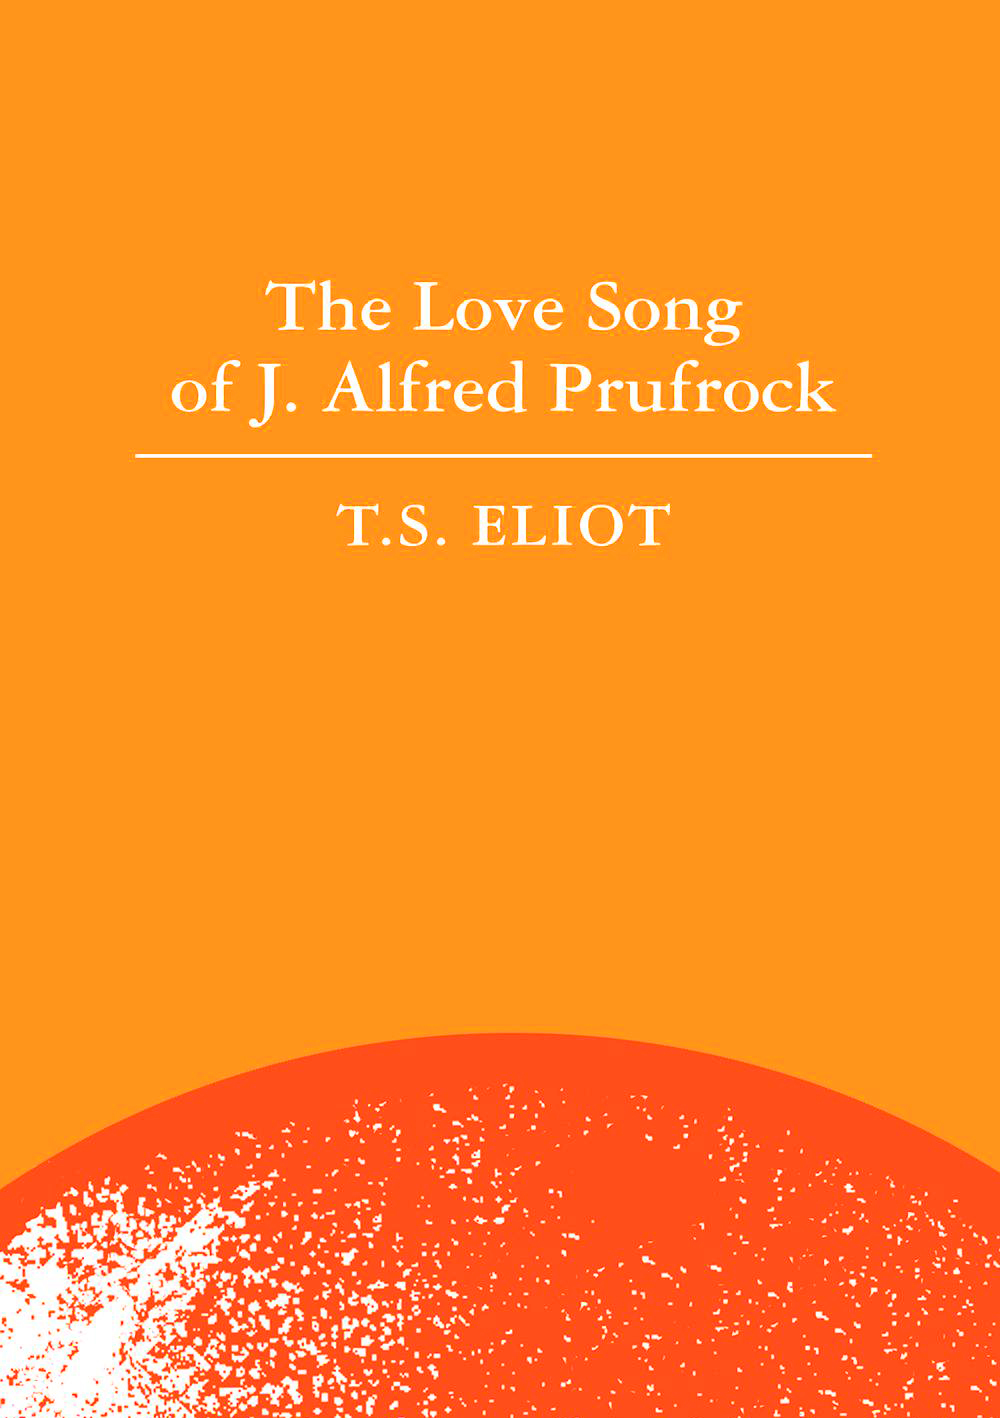 essay on the love song of j alfred prufrock